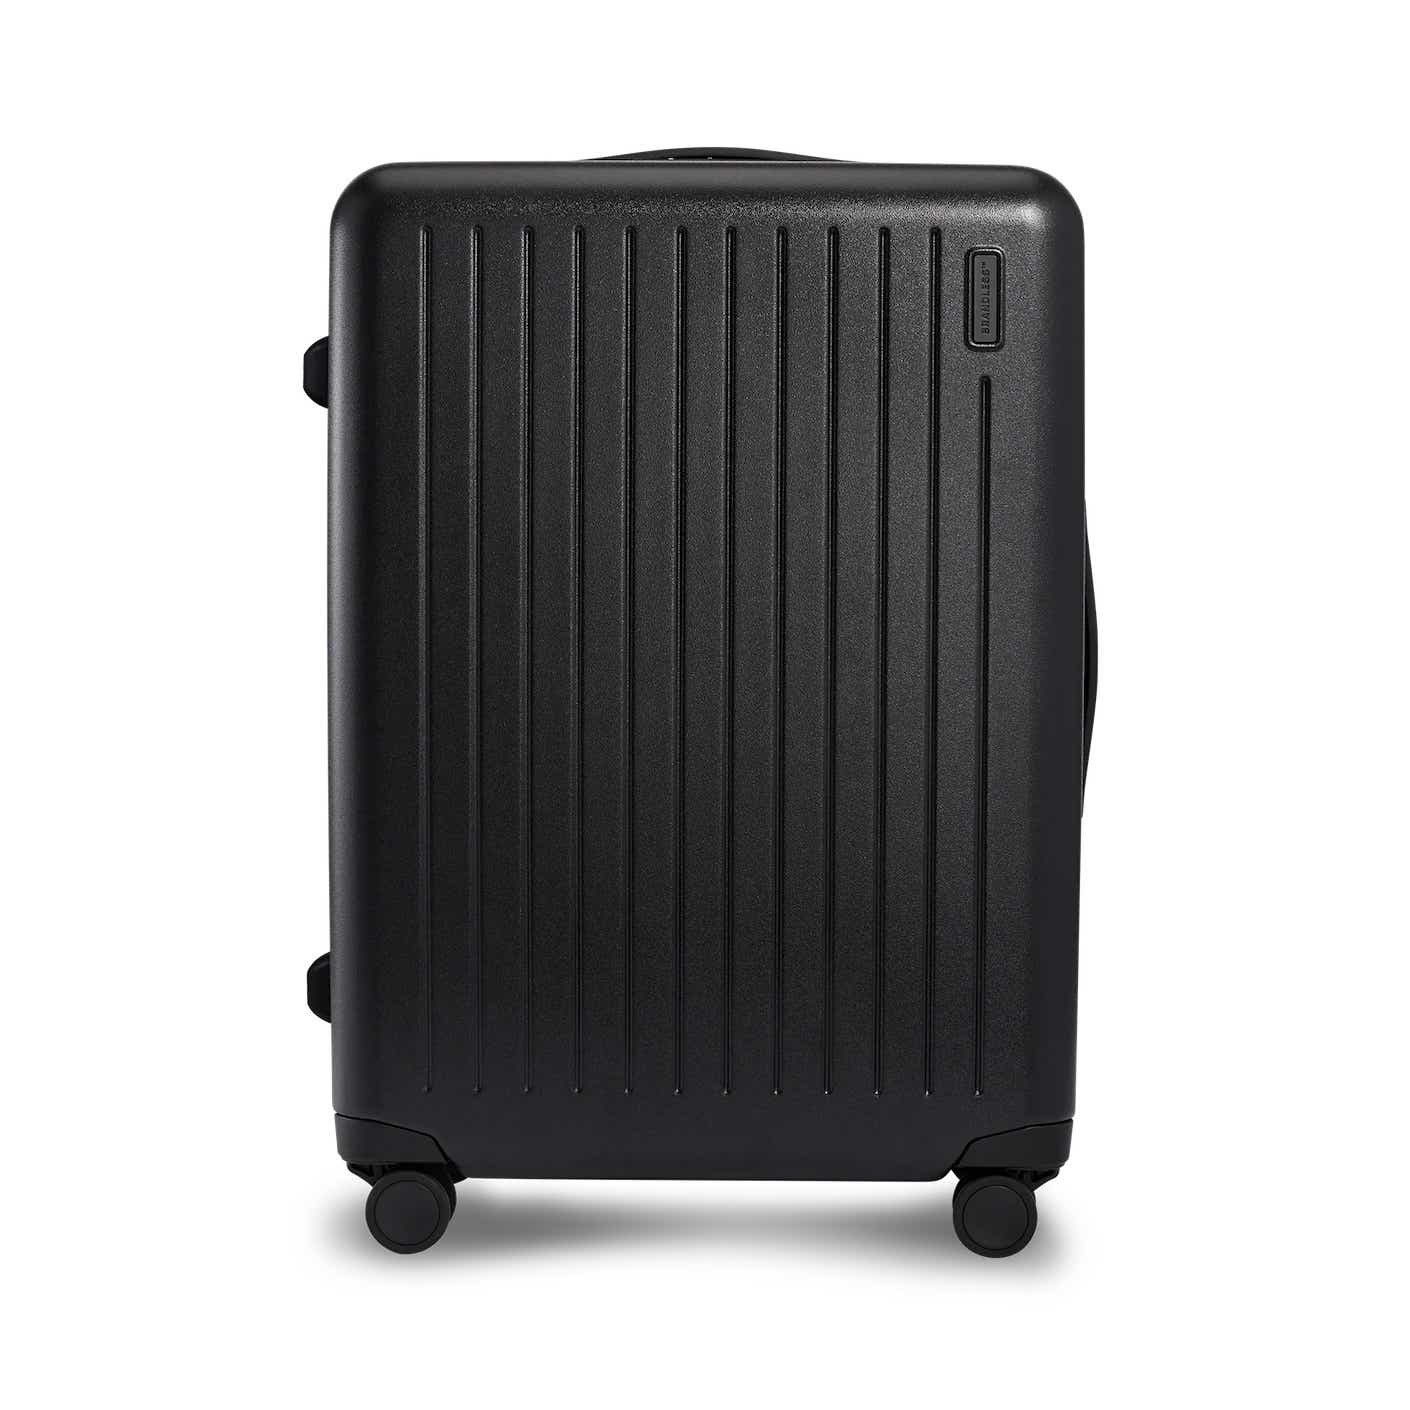 A hardsided black suitcase pictured in front of a white background.